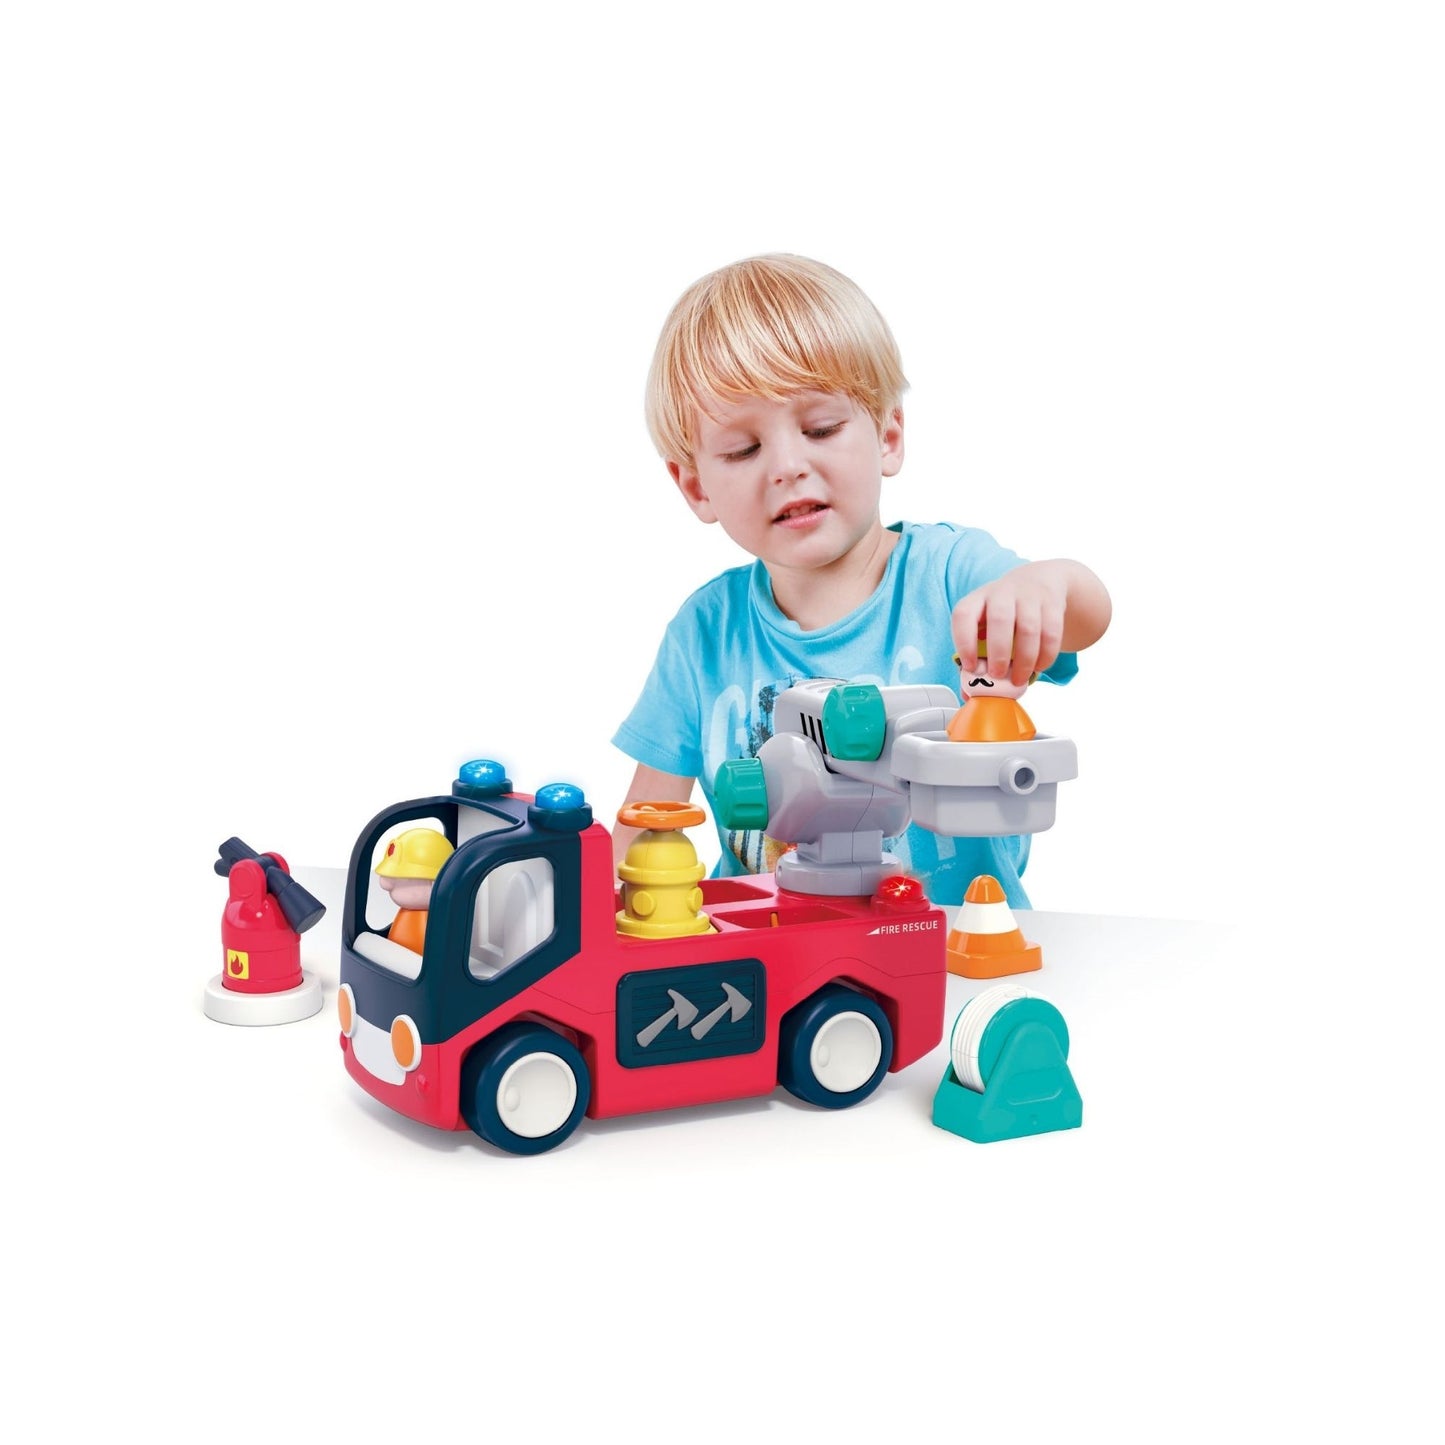 Hola Early Learning Fire Engine